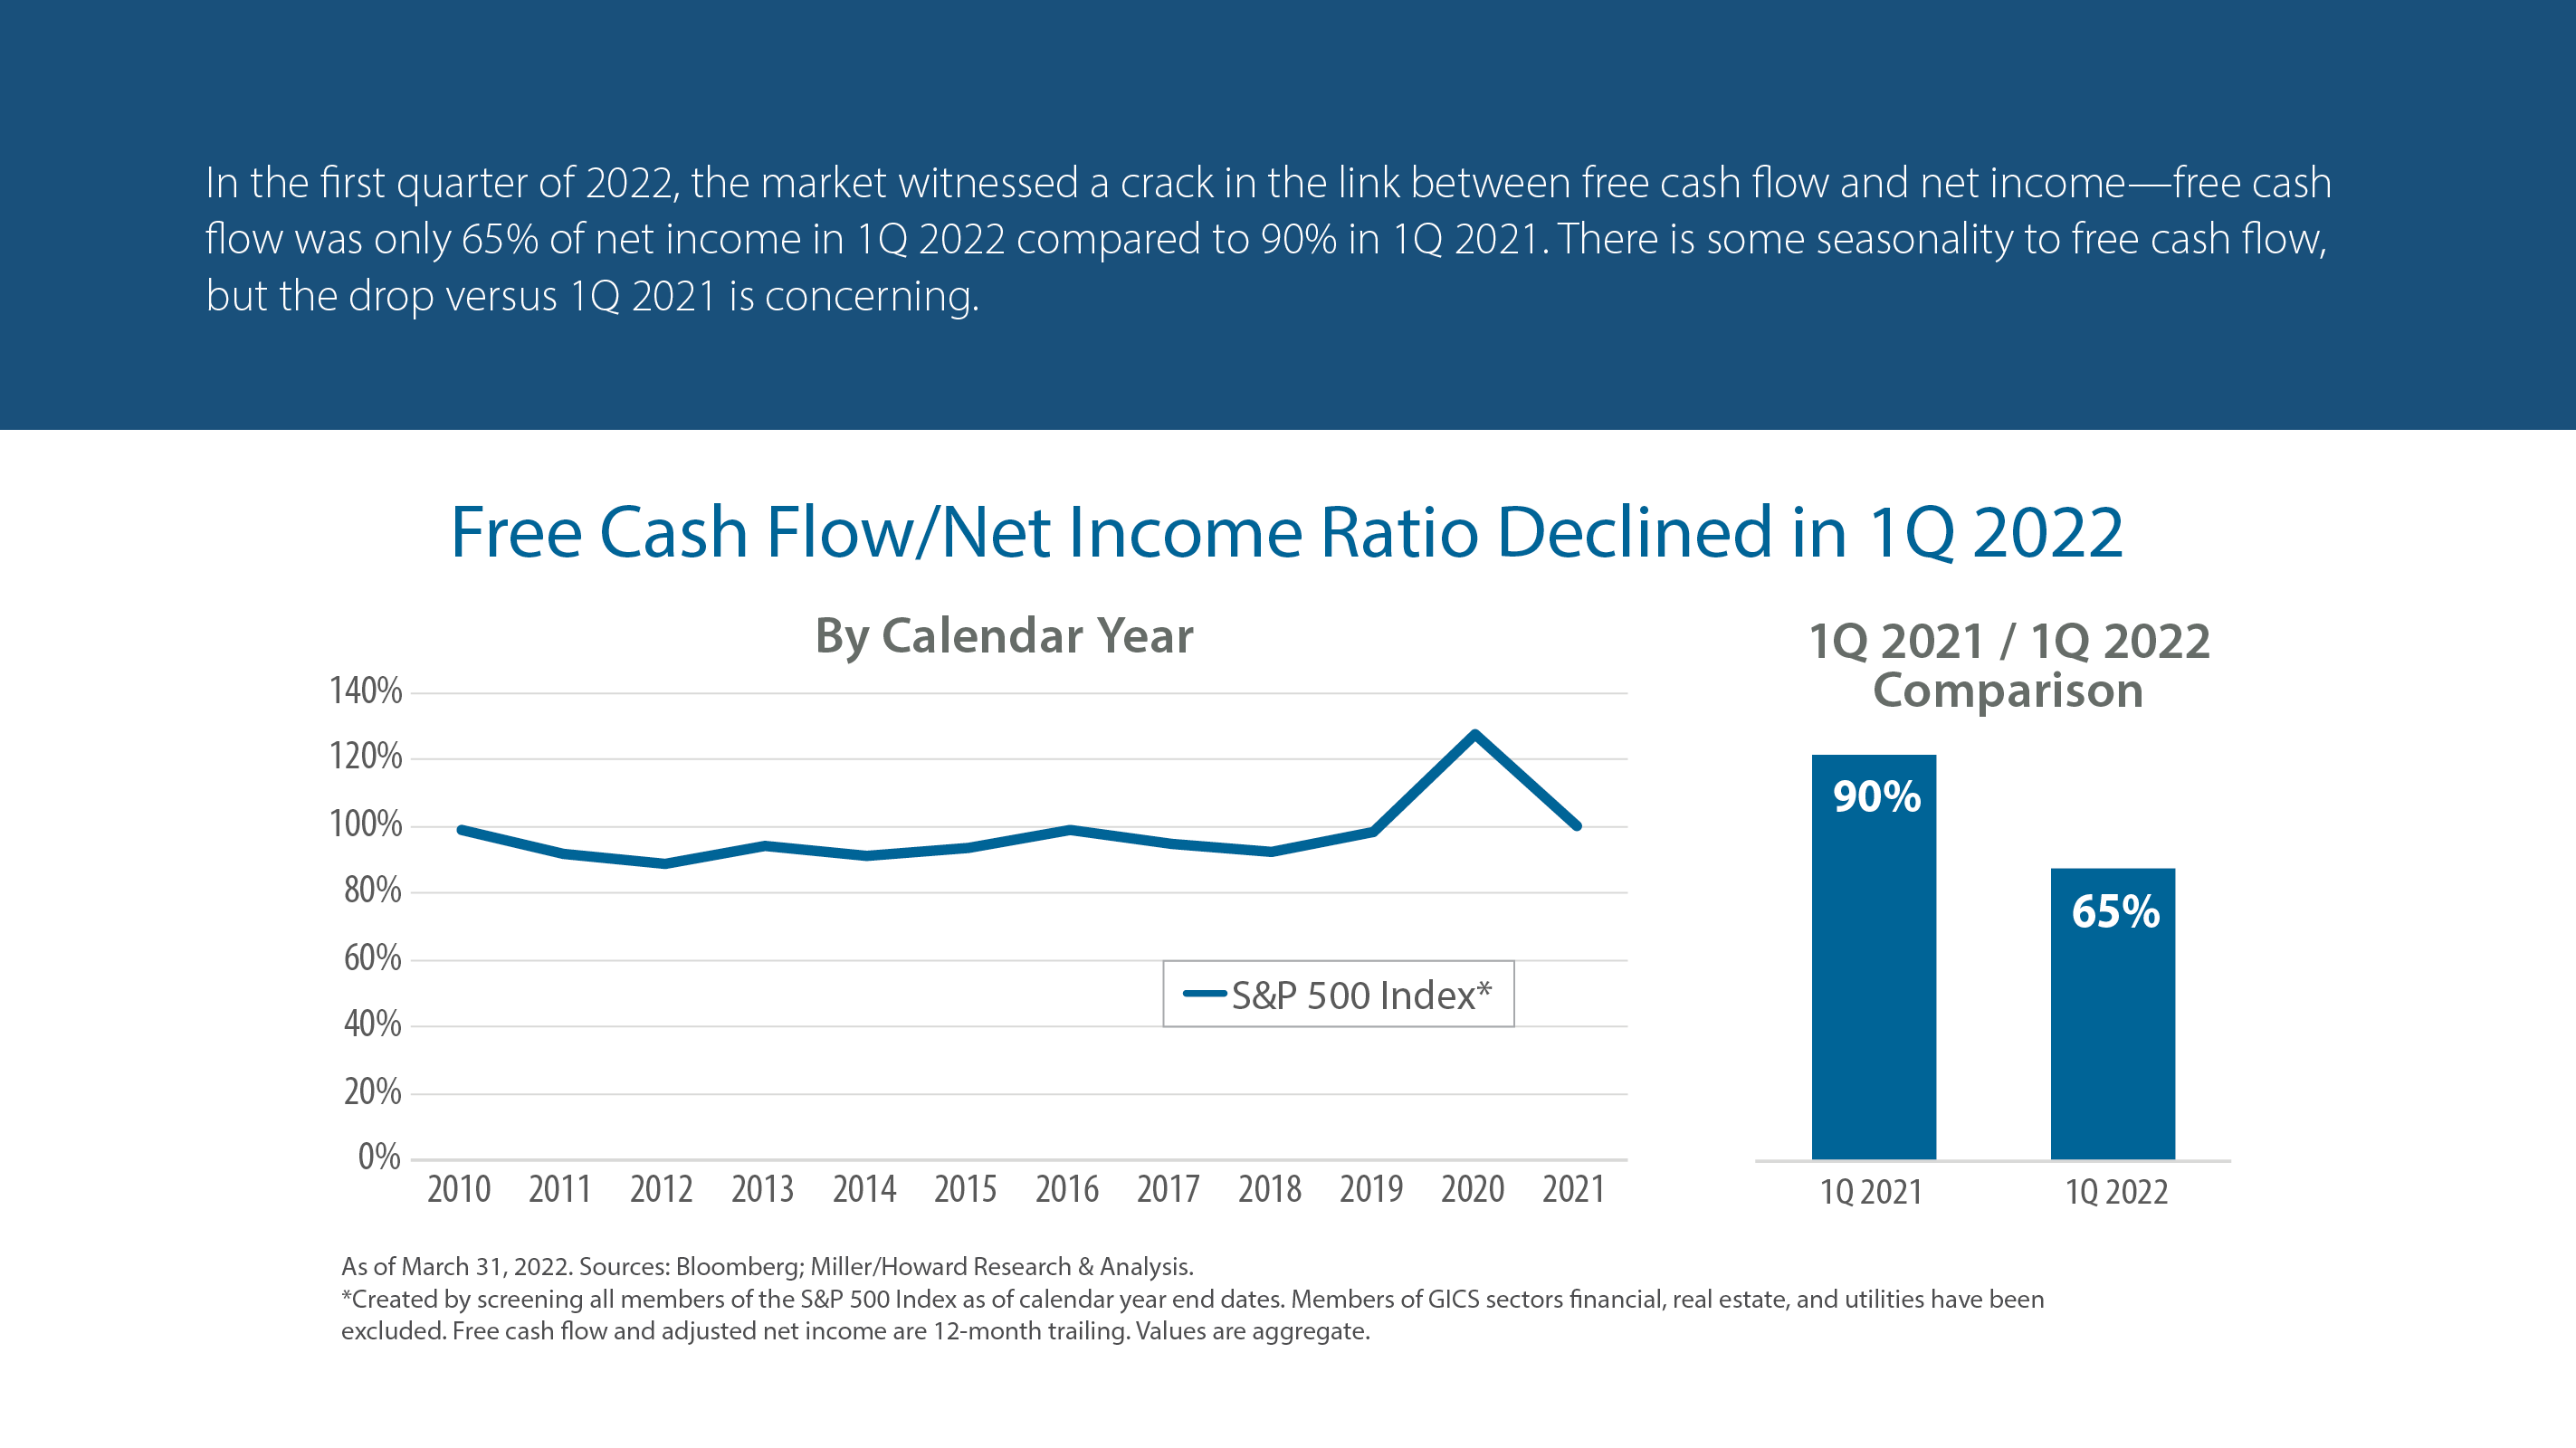 Free Cash Flow/Net Income Ratio Declined in 1Q 2022